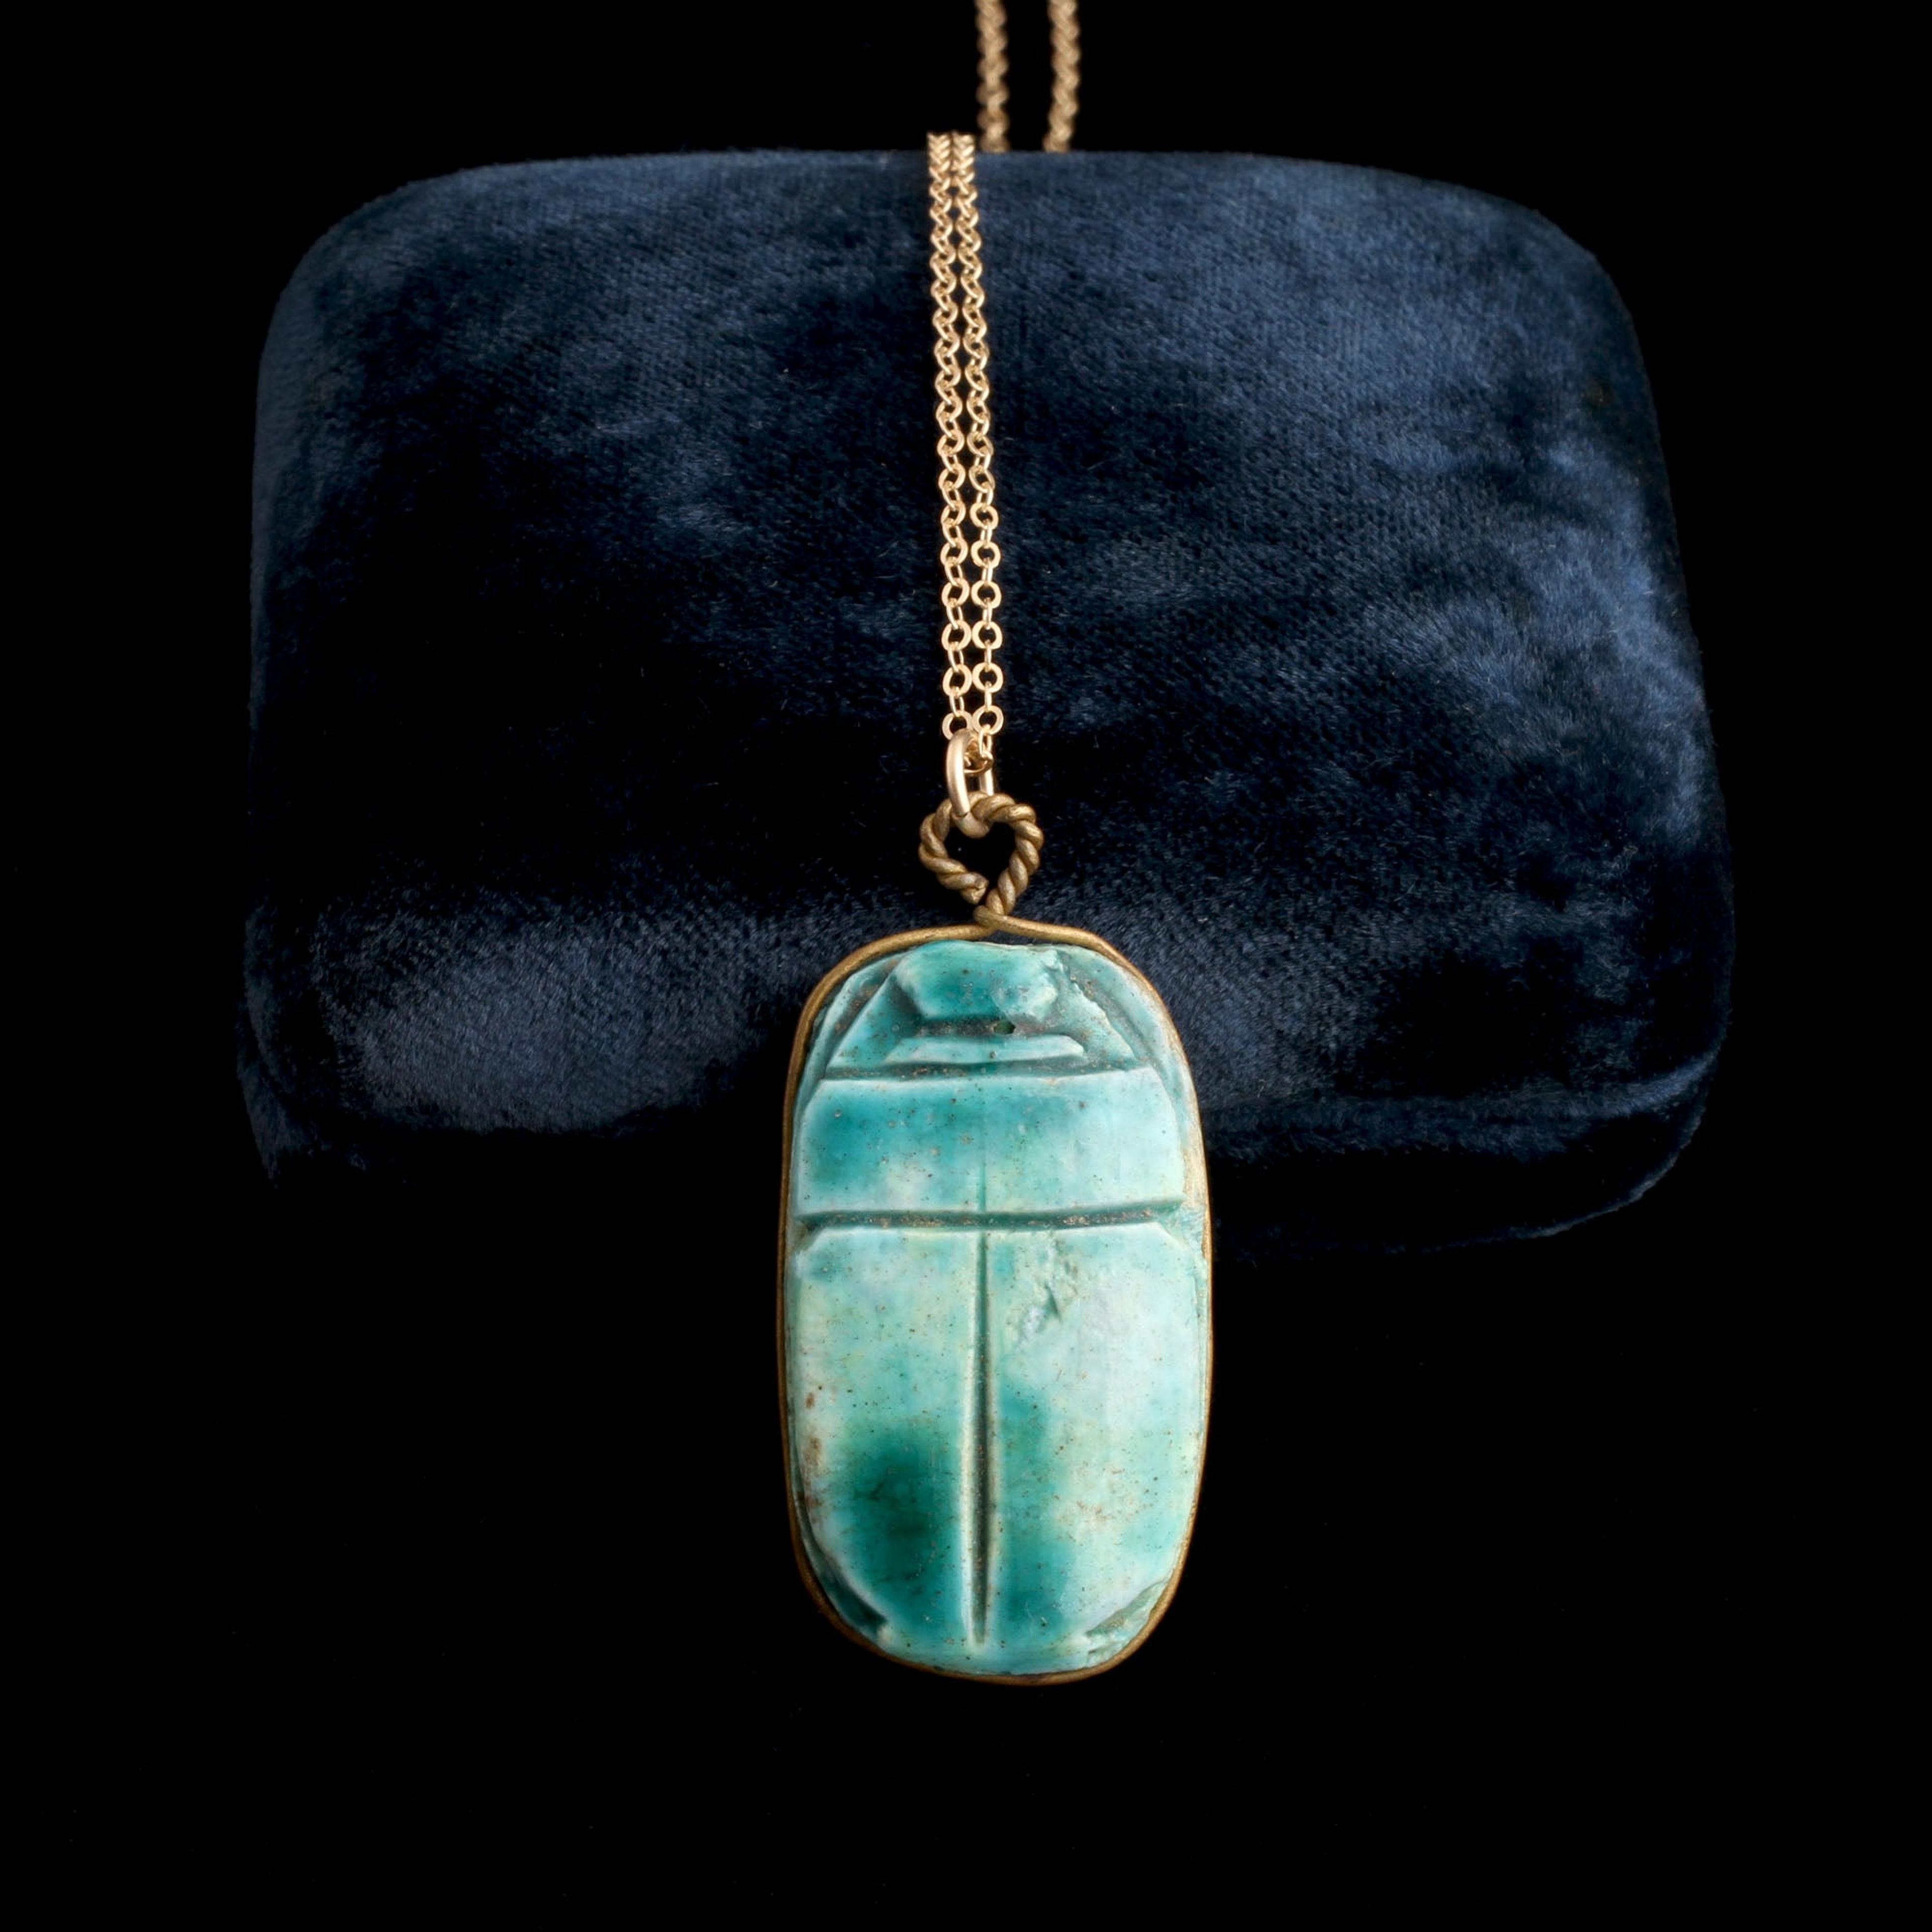 Vintage XL Egyptian Revival Scarab Faience Necklace